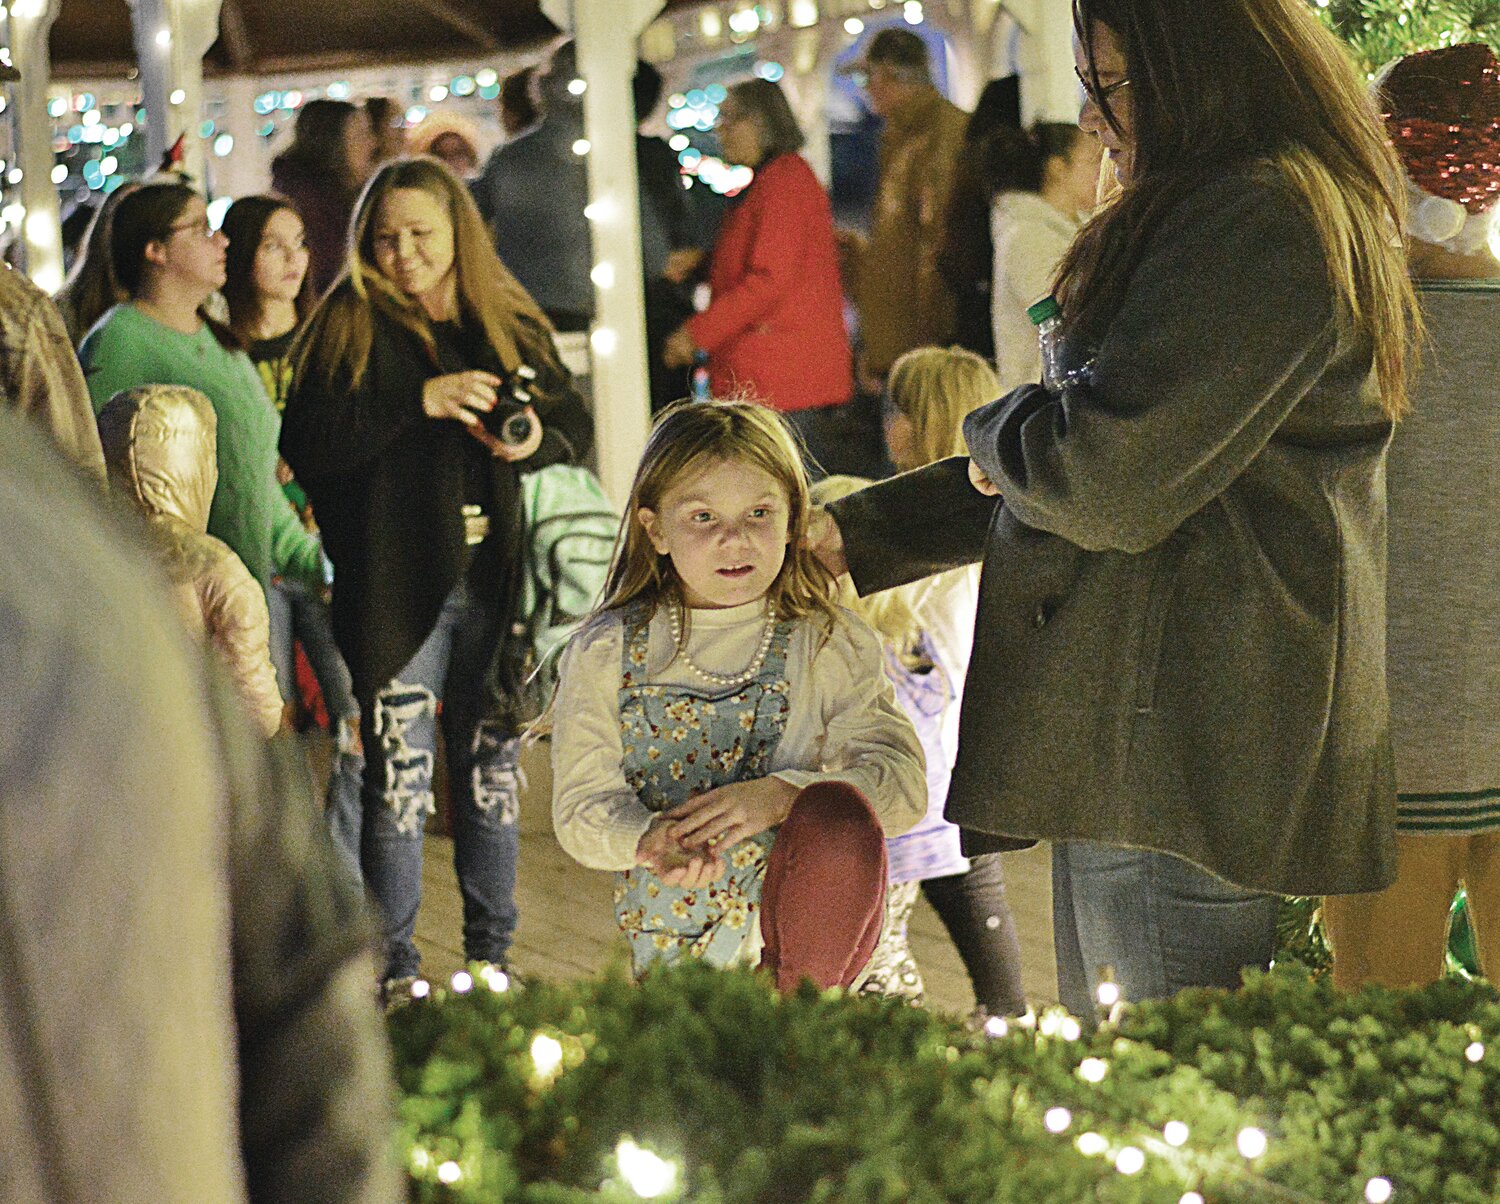 Kids of all ages enjoy the lights.